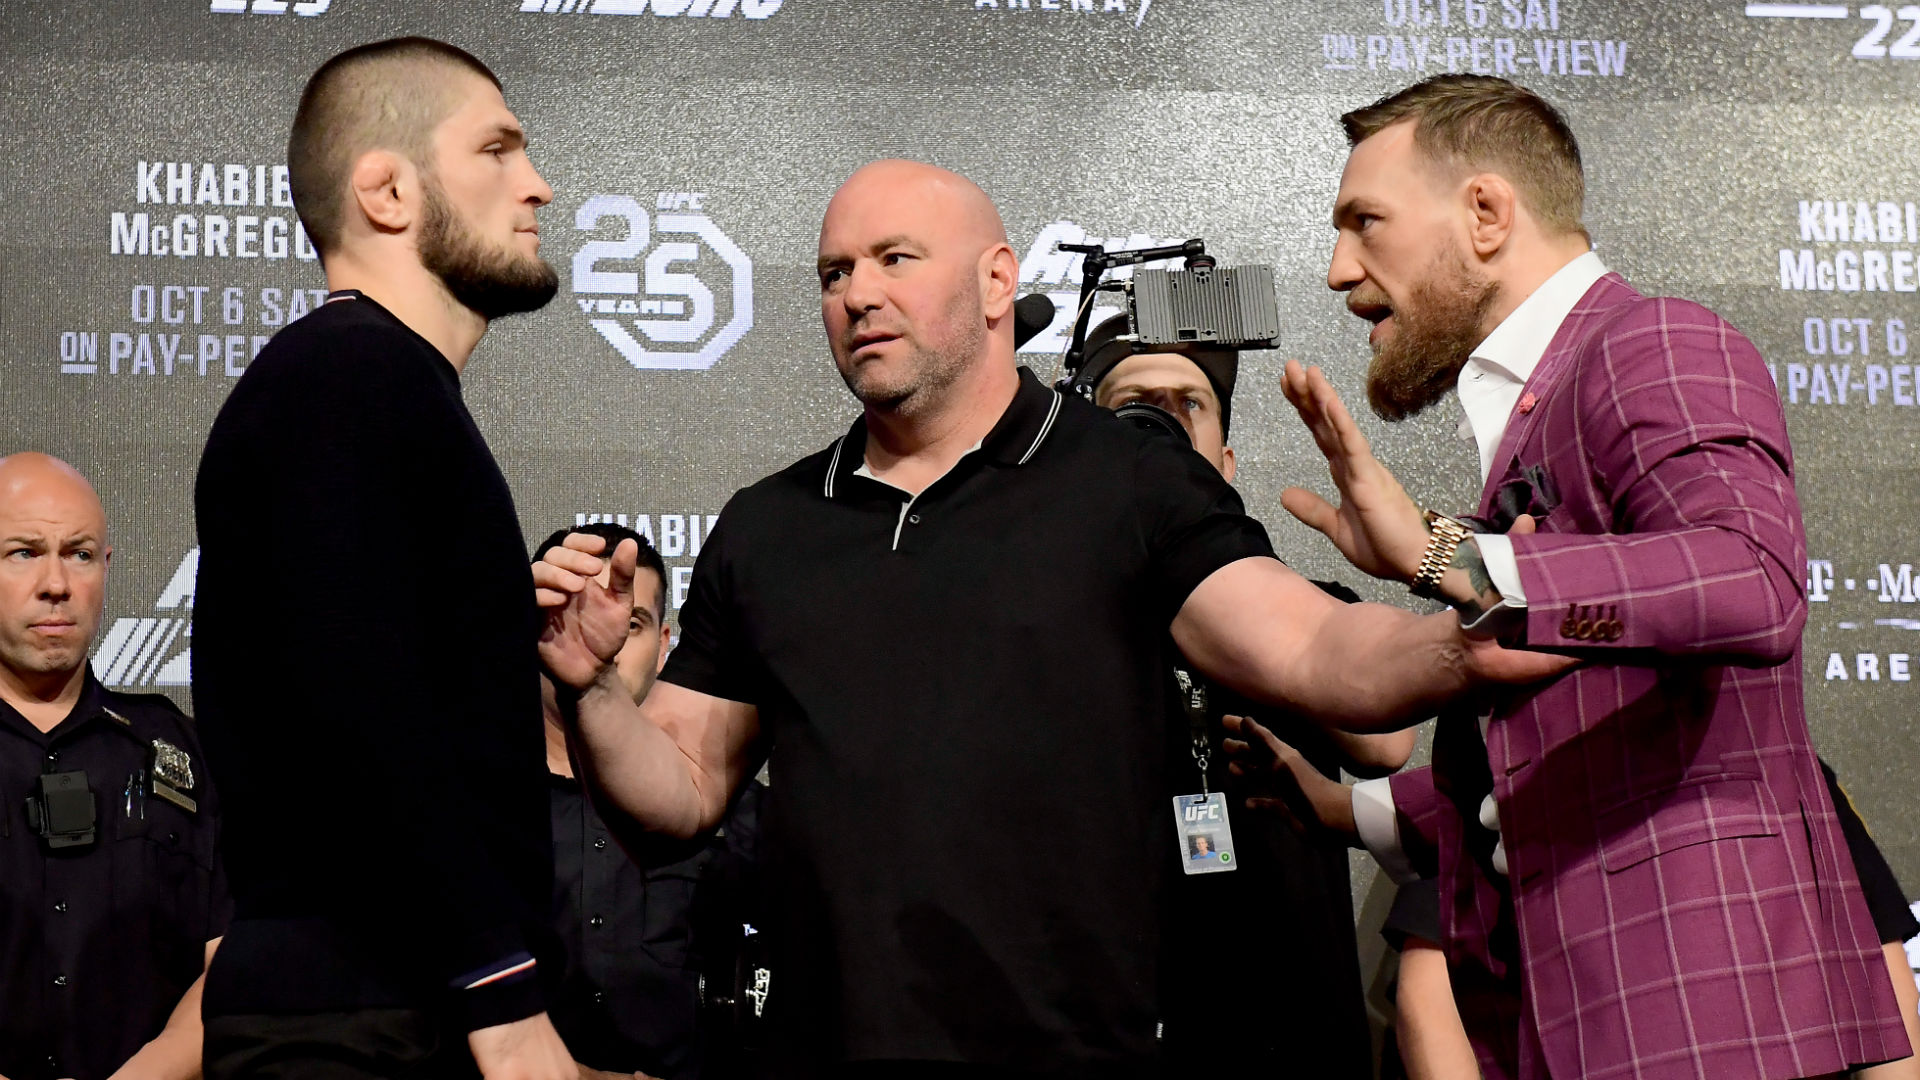 UFC 229: Khabib vs. McGregor fight date, PPV price, how to watch and live stream | MMA ...1920 x 1080